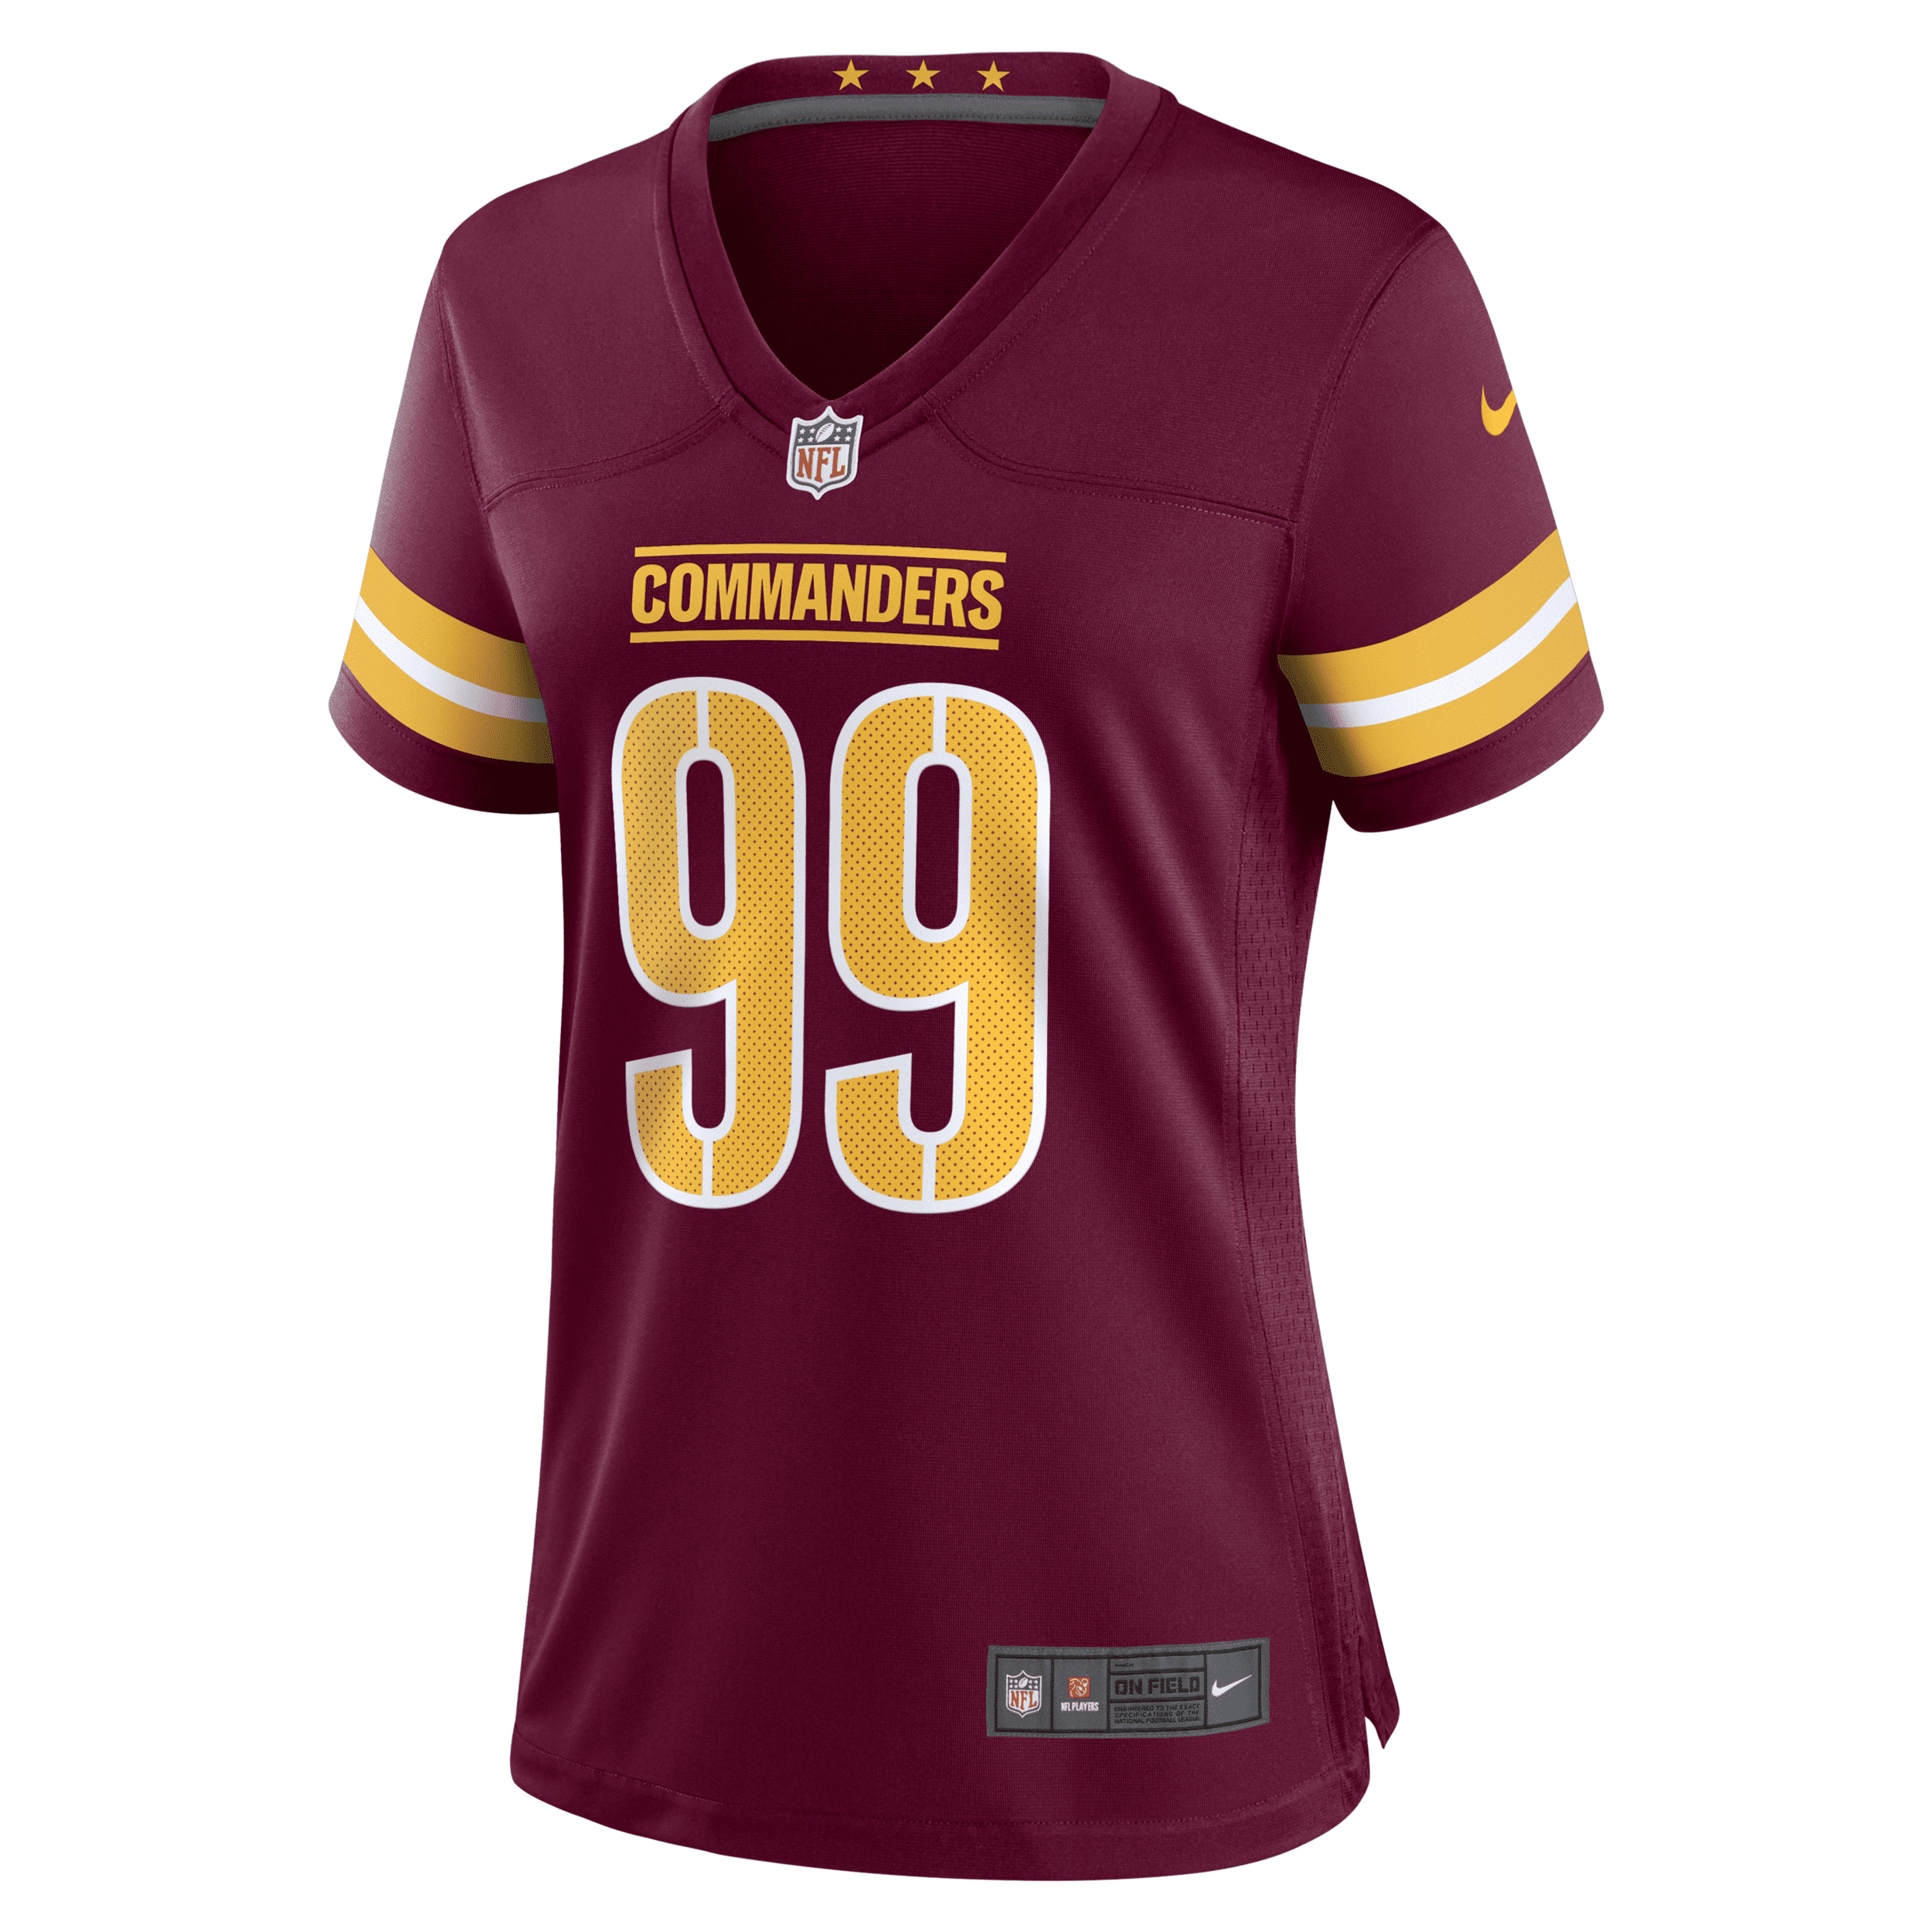 NIKE WOMEN'S NFL WASHINGTON COMMANDERS (CHASE YOUNG) GAME FOOTBALL JERSEY,14181010